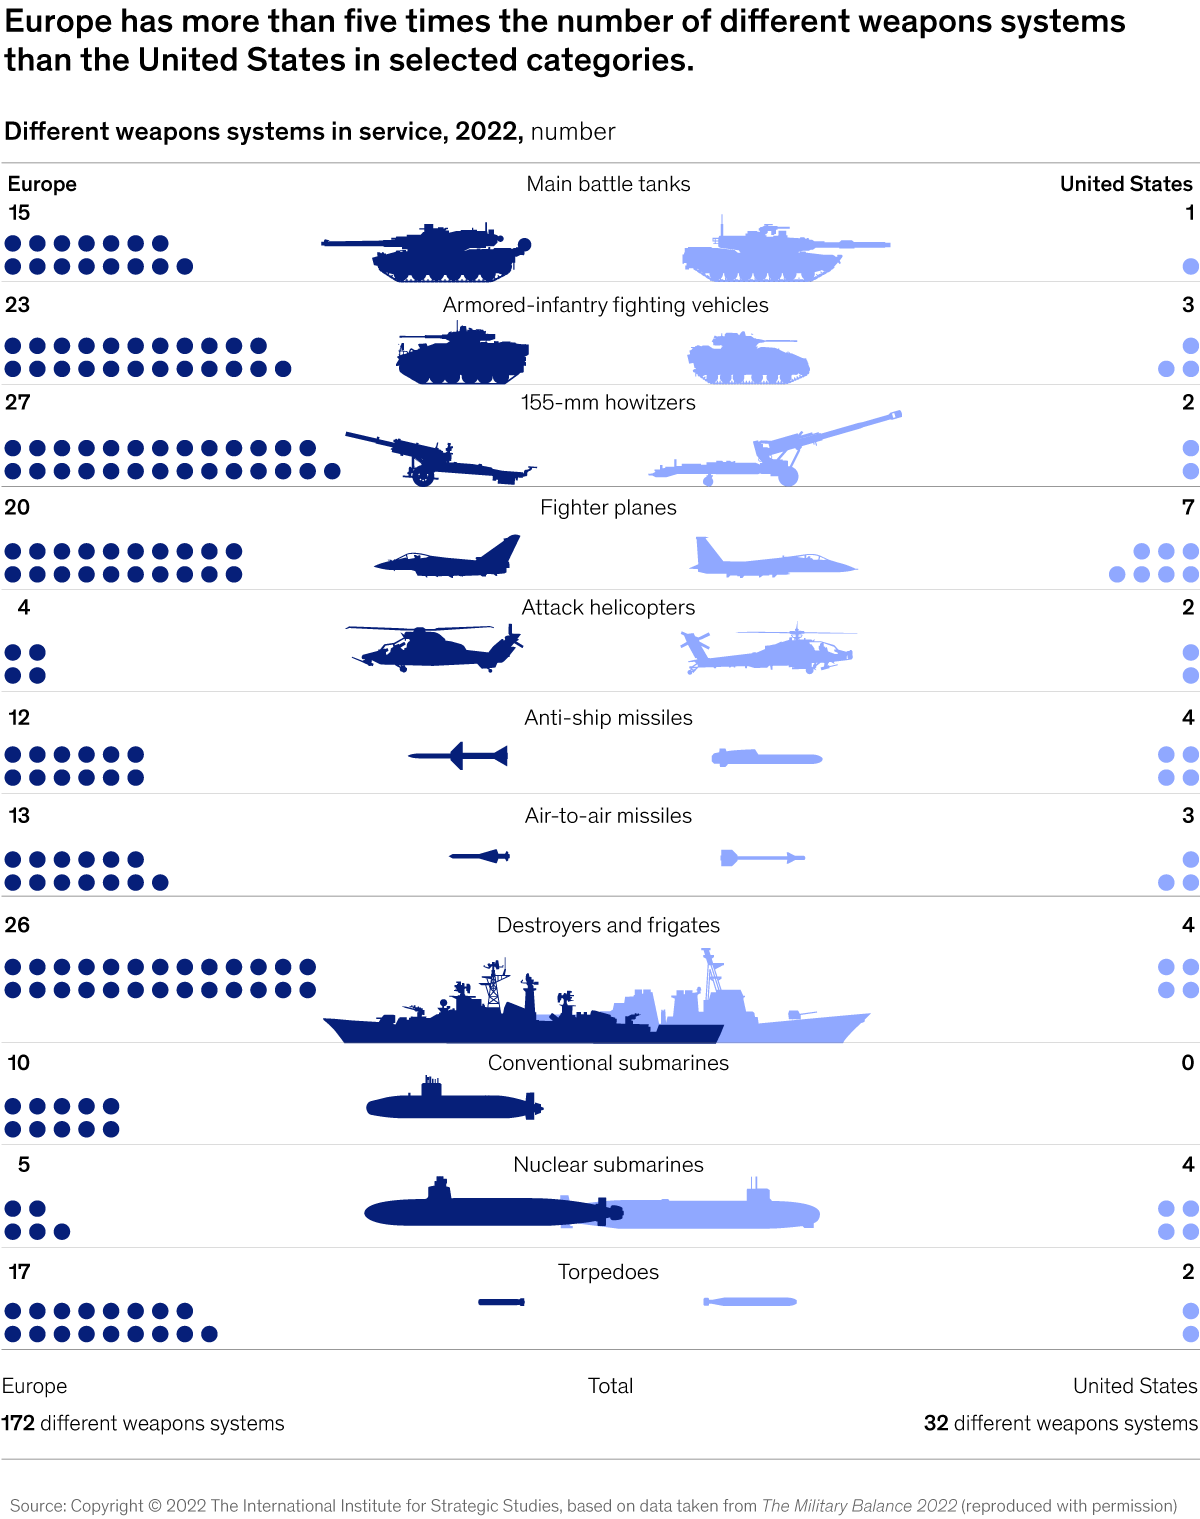 Graphic showcasing the amount of various weapons systems produced by European countries and the United States